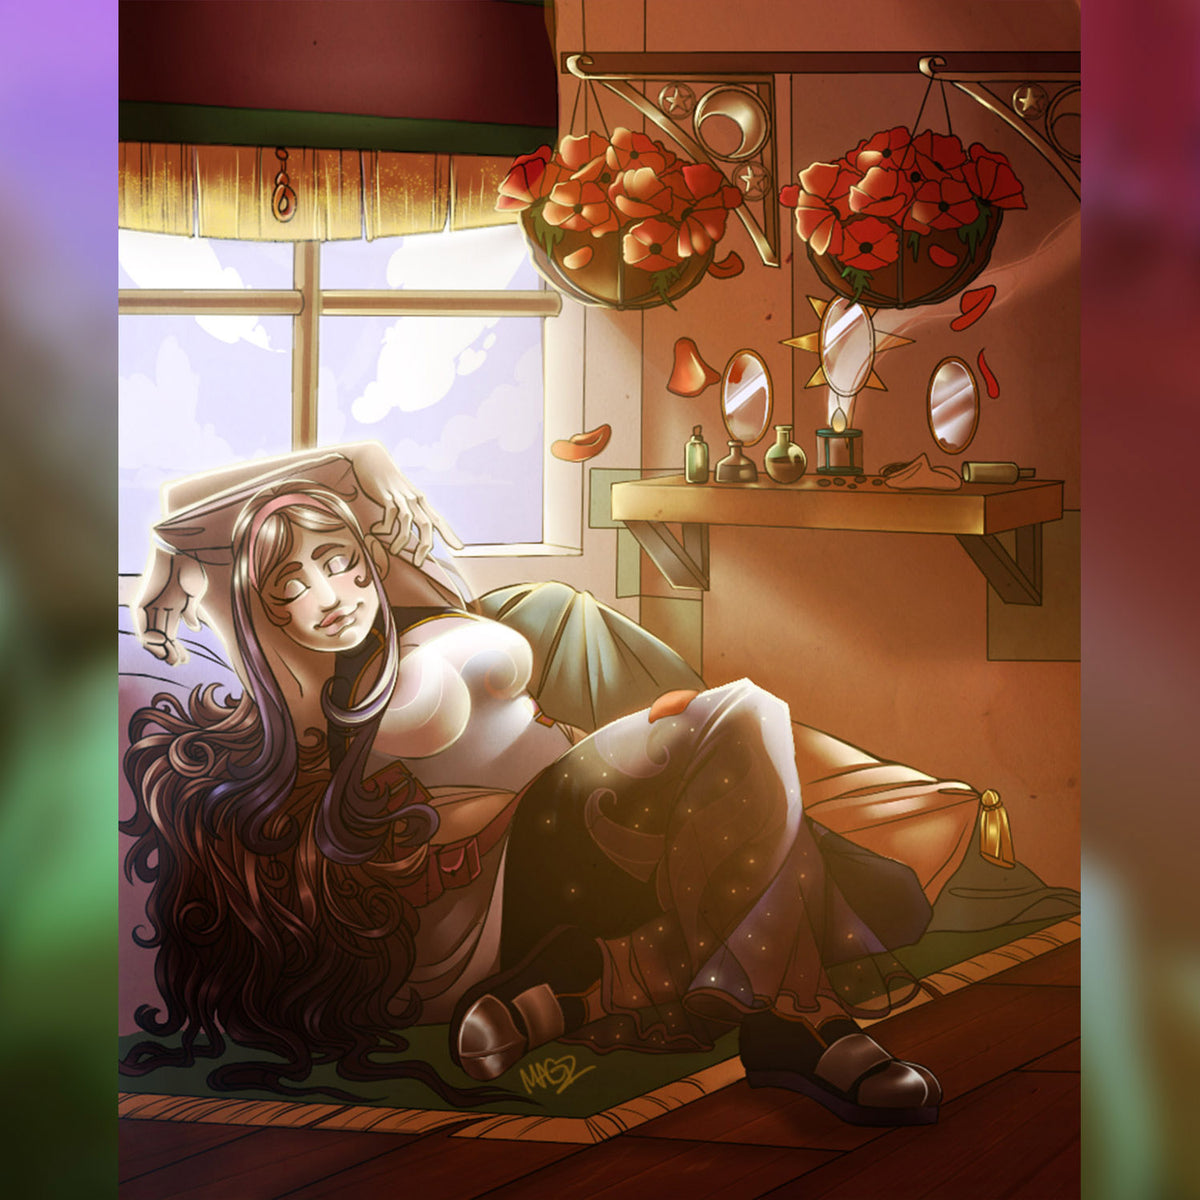 Art of Marigold sleeping in a comfy setup. She is sleeping next to a window, and light is coming in. The image links to a twitter post, https://twitter.com/TEOTLNewAge/status/1570978366521745408.